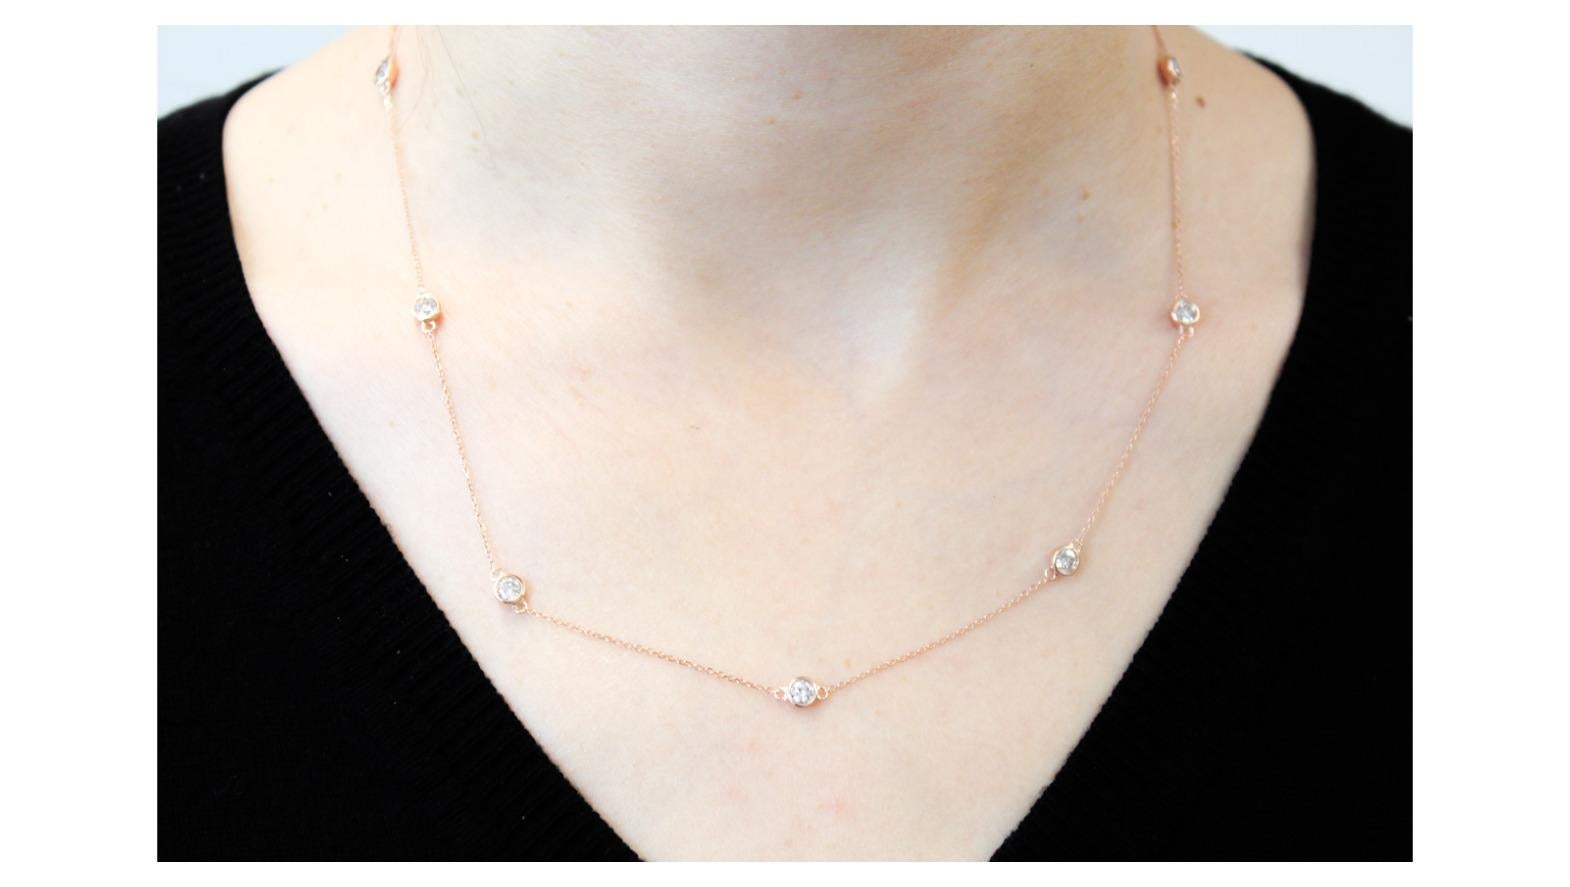 A gorgeous diamond necklace will rarely go overlooked. This 18” piece is both rare and stunning. It includes bezels that set white round diamonds. There are 10 white diamonds that total 2.00 and are I-J color and I1/I2 clarity. This versatile